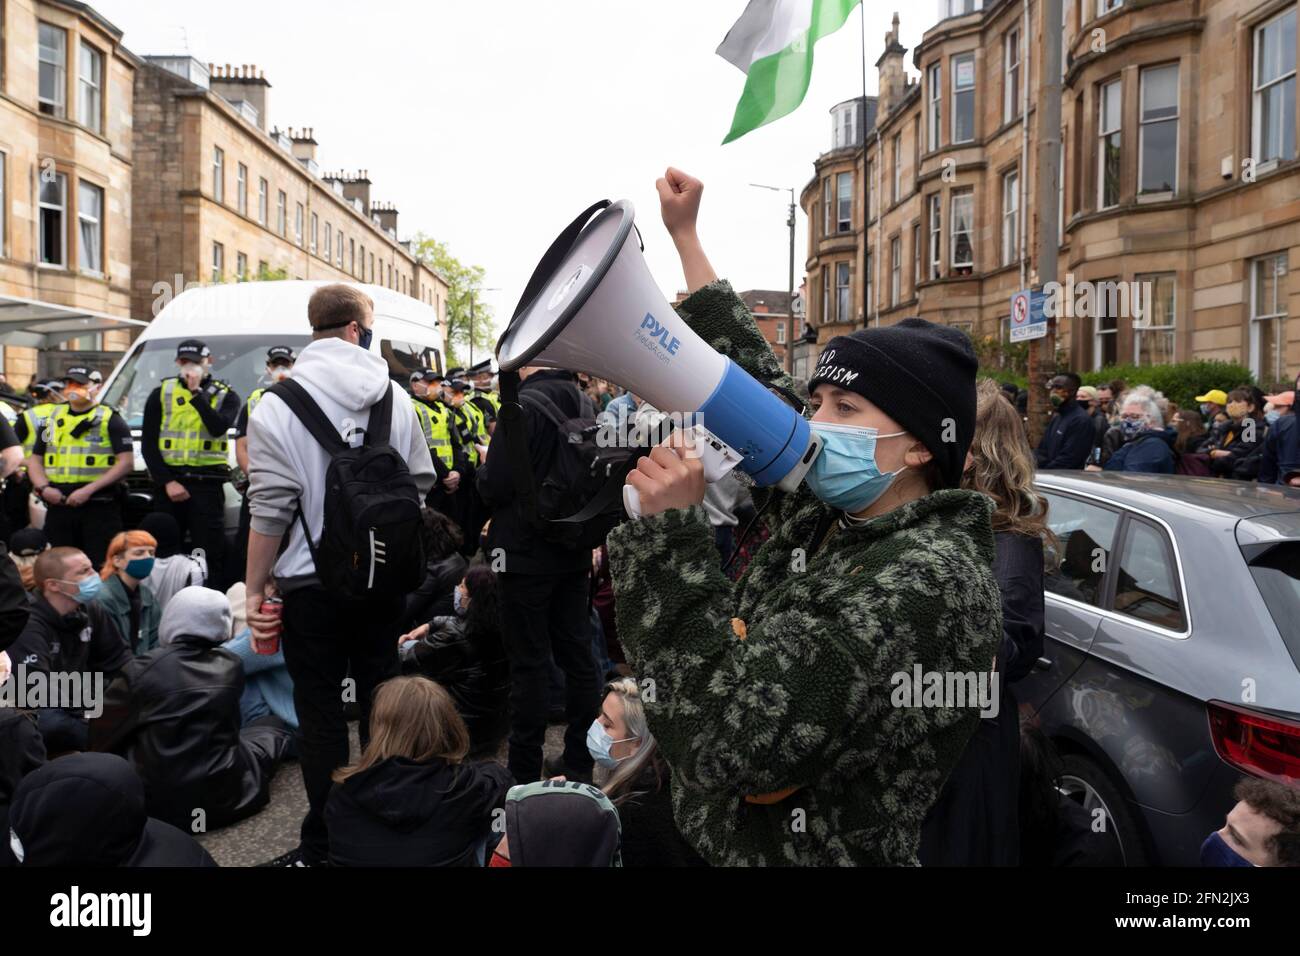 Glasgow, Scotland, UK. 13th May, 2021. Protesters gather in Pollokshields to prevent the deportation of individual from household. Heavy police presence continues with a tense stand-off between the police and protesters who are sitting in Kenmure Street Street blocking access. Credit: Iain Masterton/Alamy Live News Stock Photo